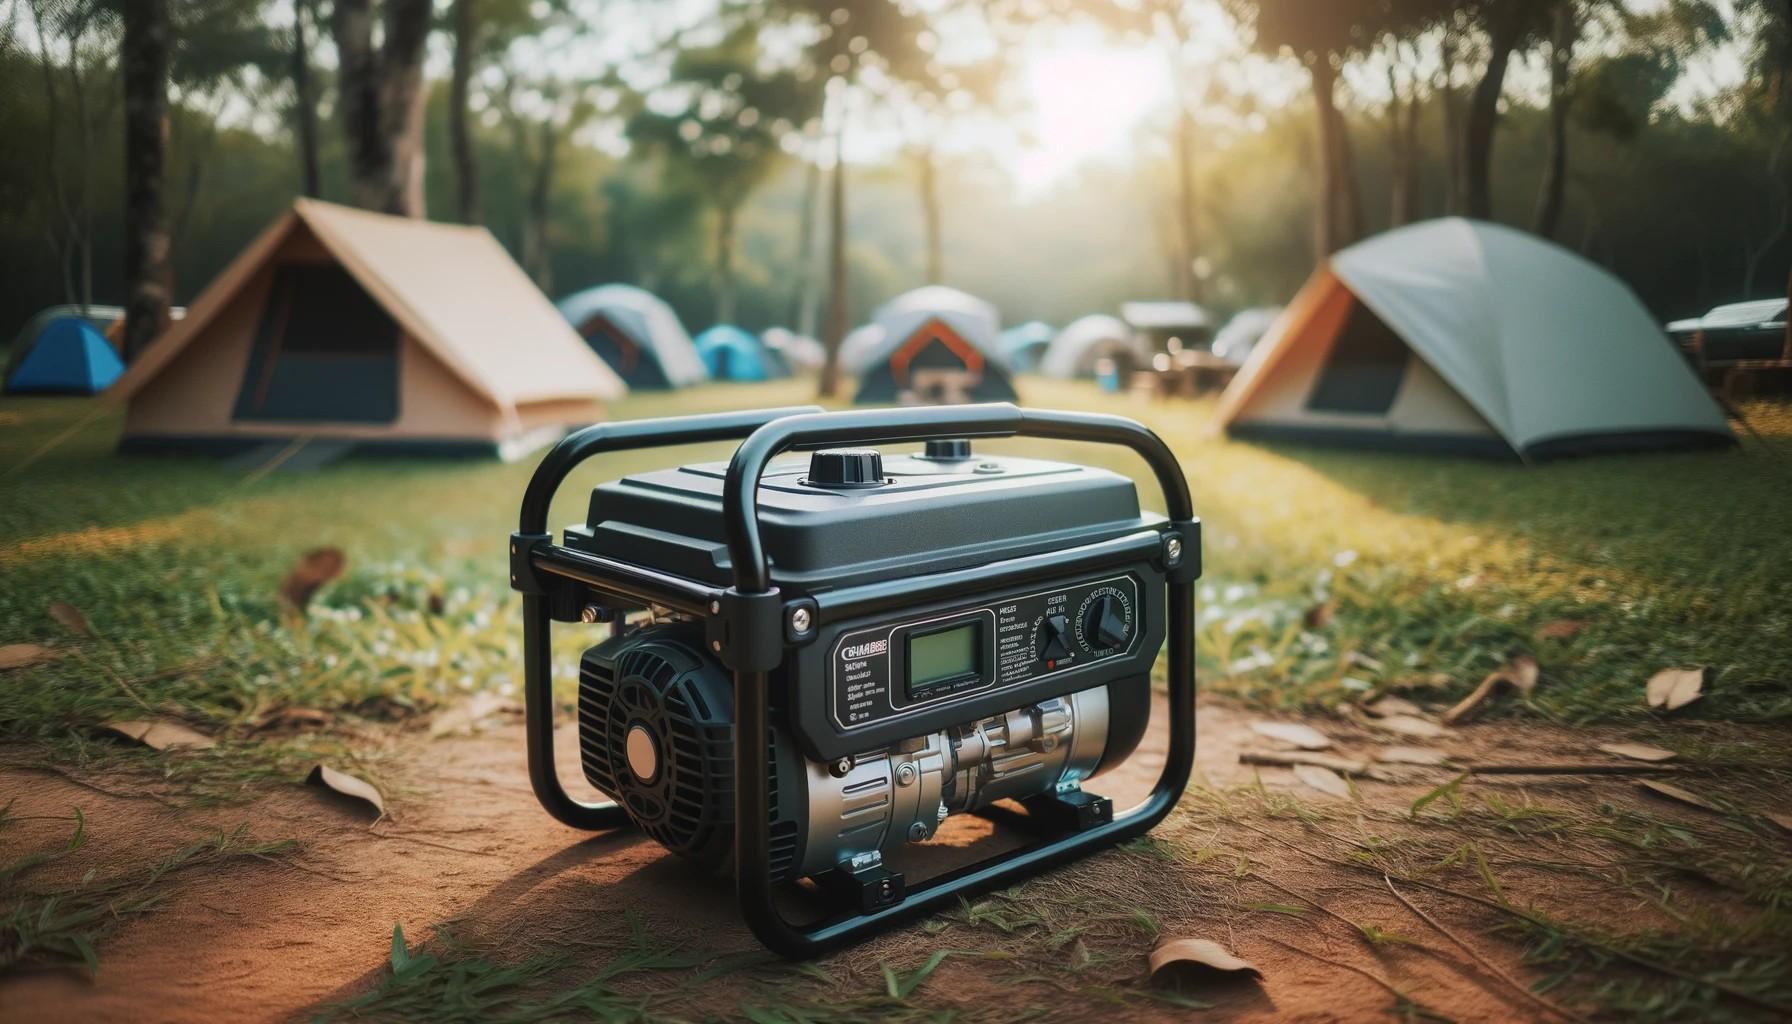 A compact portable generator with sturdy handles, situated at a campsite with tents, emphasizing its outdoor utility.